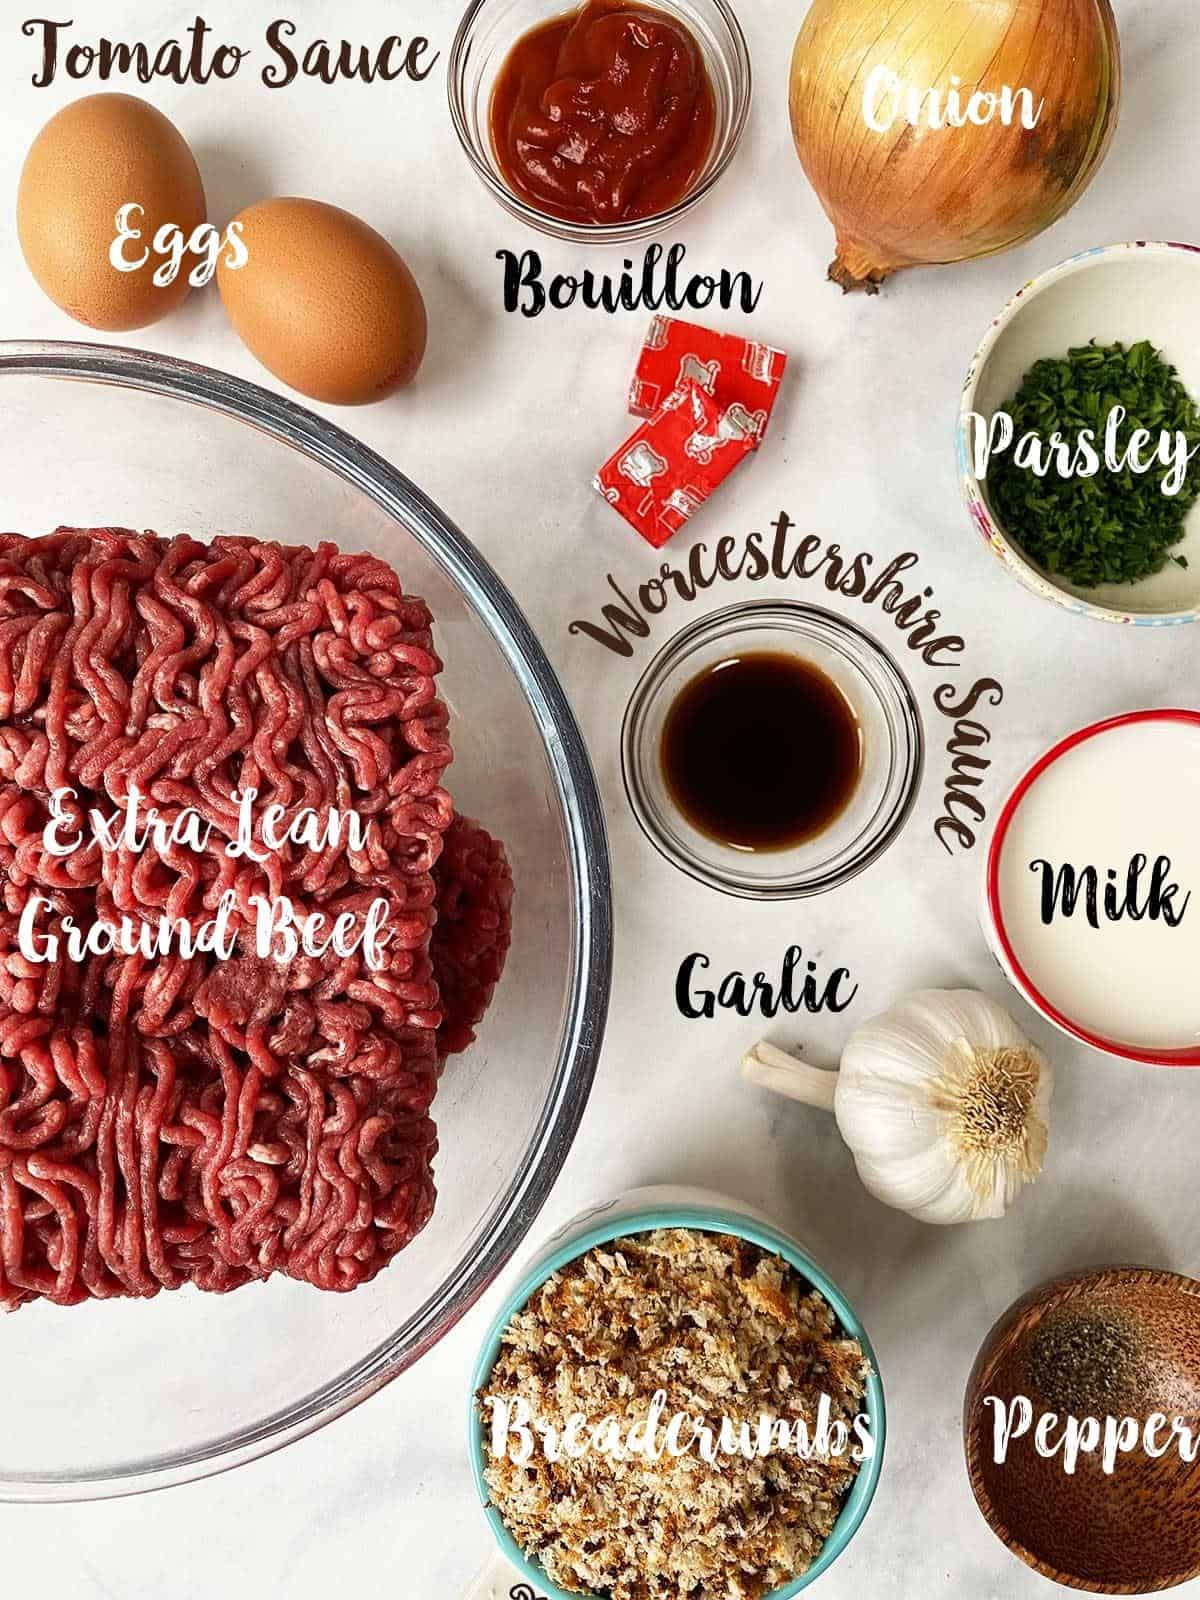 Ingredients to make low calorie meatloaf labelled on a table.